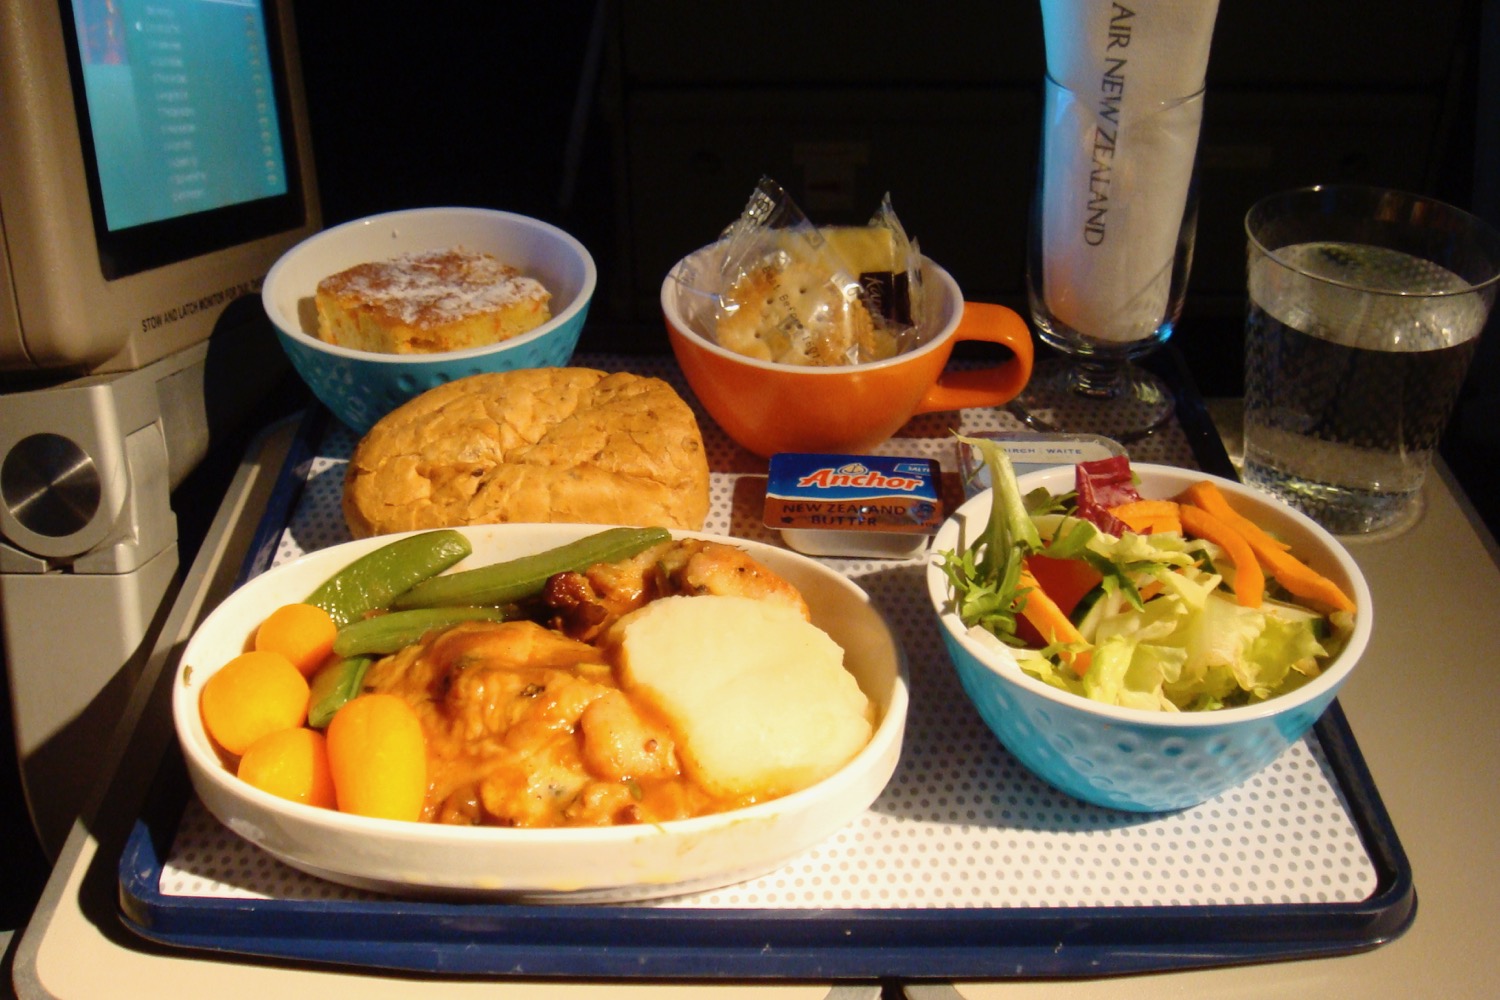 Air New Zealand Economy meals